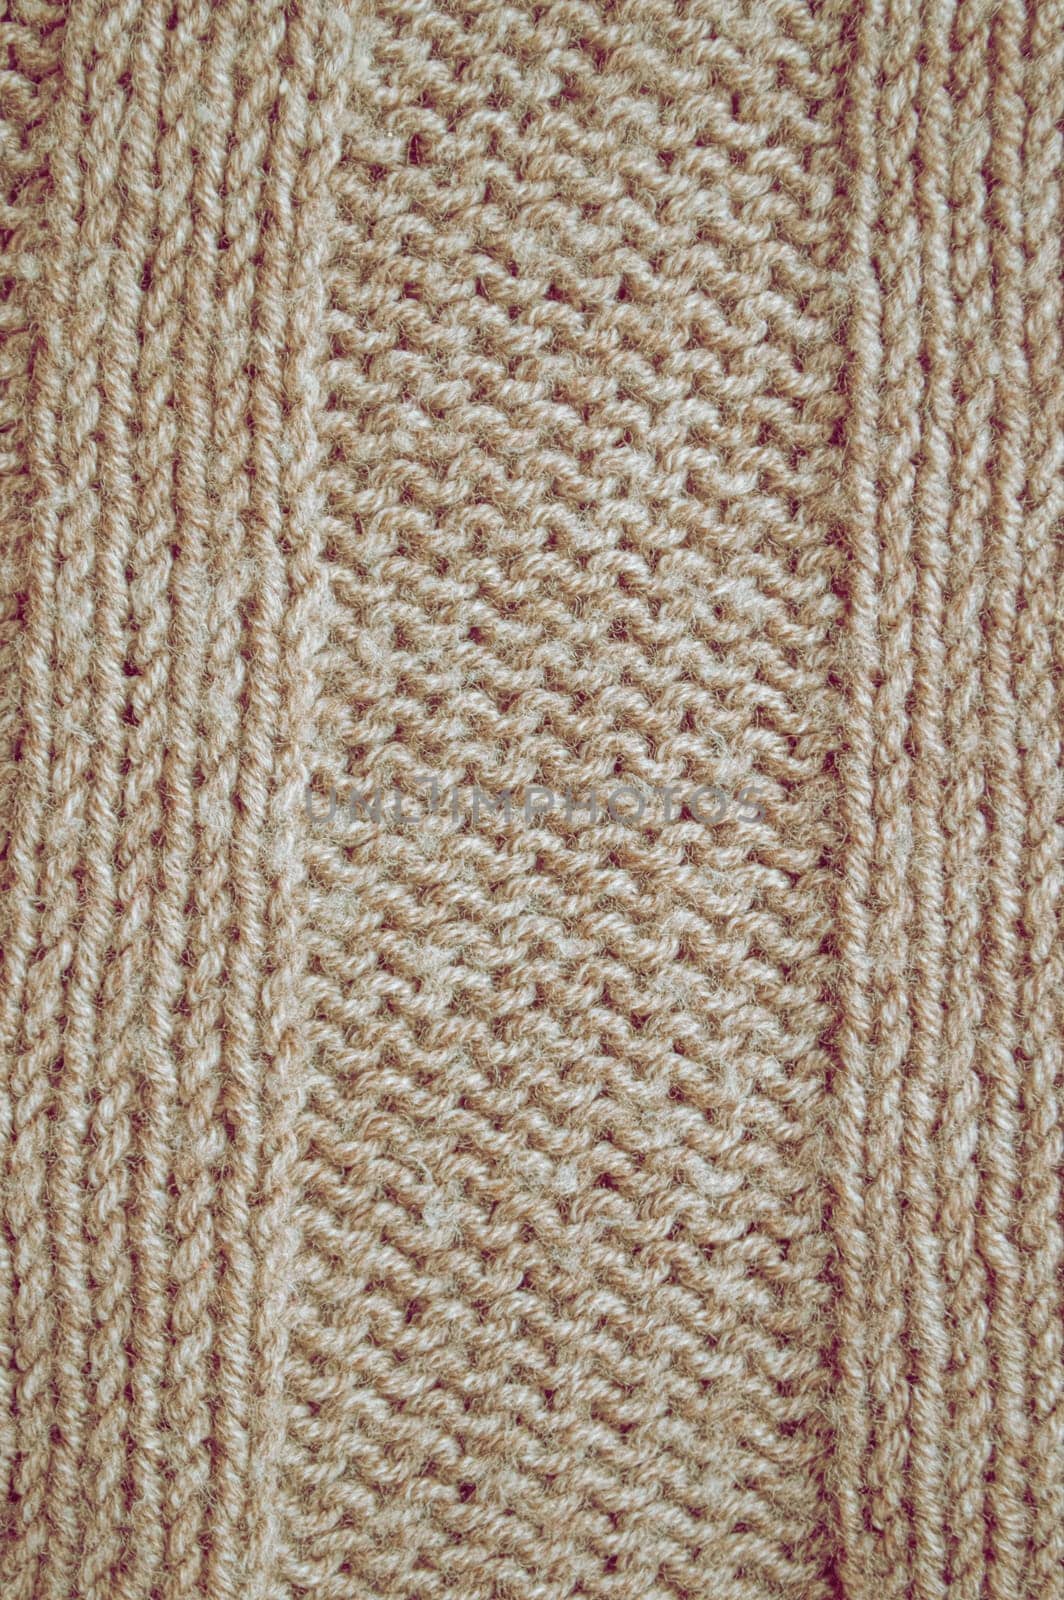 Knitting Texture. Organic Woven Pullover. Knitwear Holiday Background. Linen Knitted Texture. Soft Thread. Scandinavian Warm Scarf. Closeup Yarn Embroidery. Weave Knitted Texture.